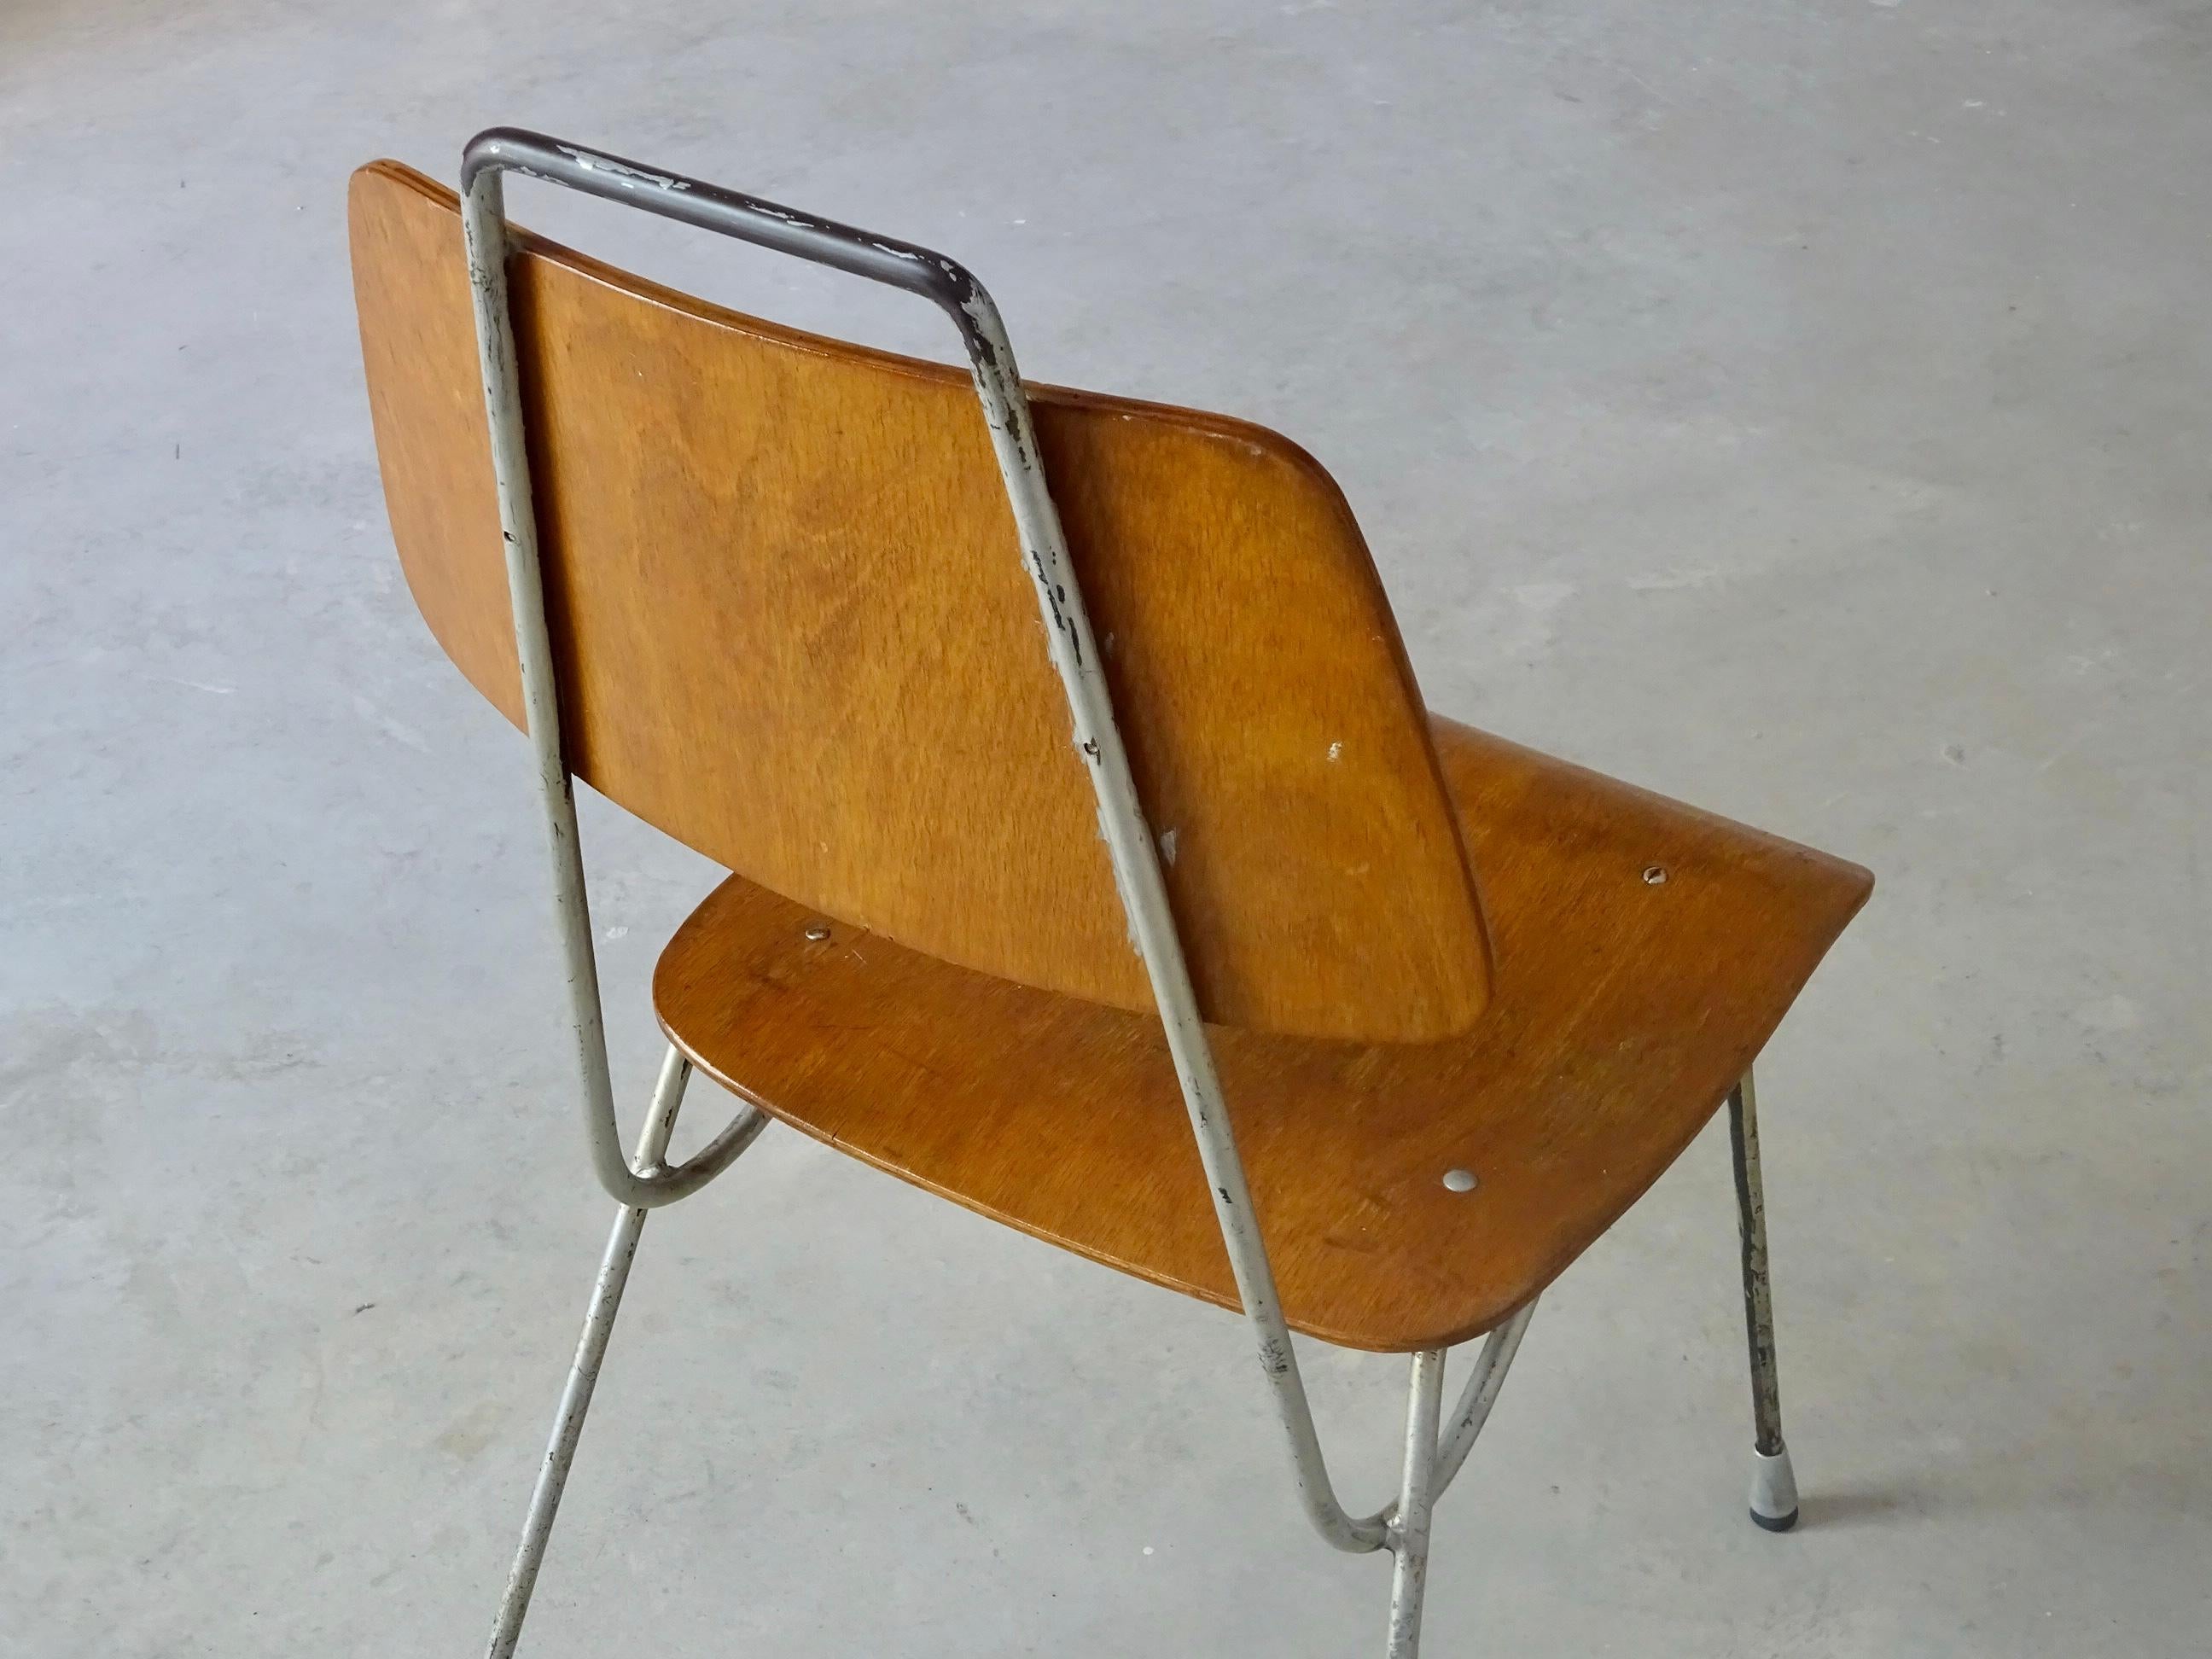 Spanish Dinning Chair Designed by Antoni De Moragas 'Grup R', 1950s For Sale